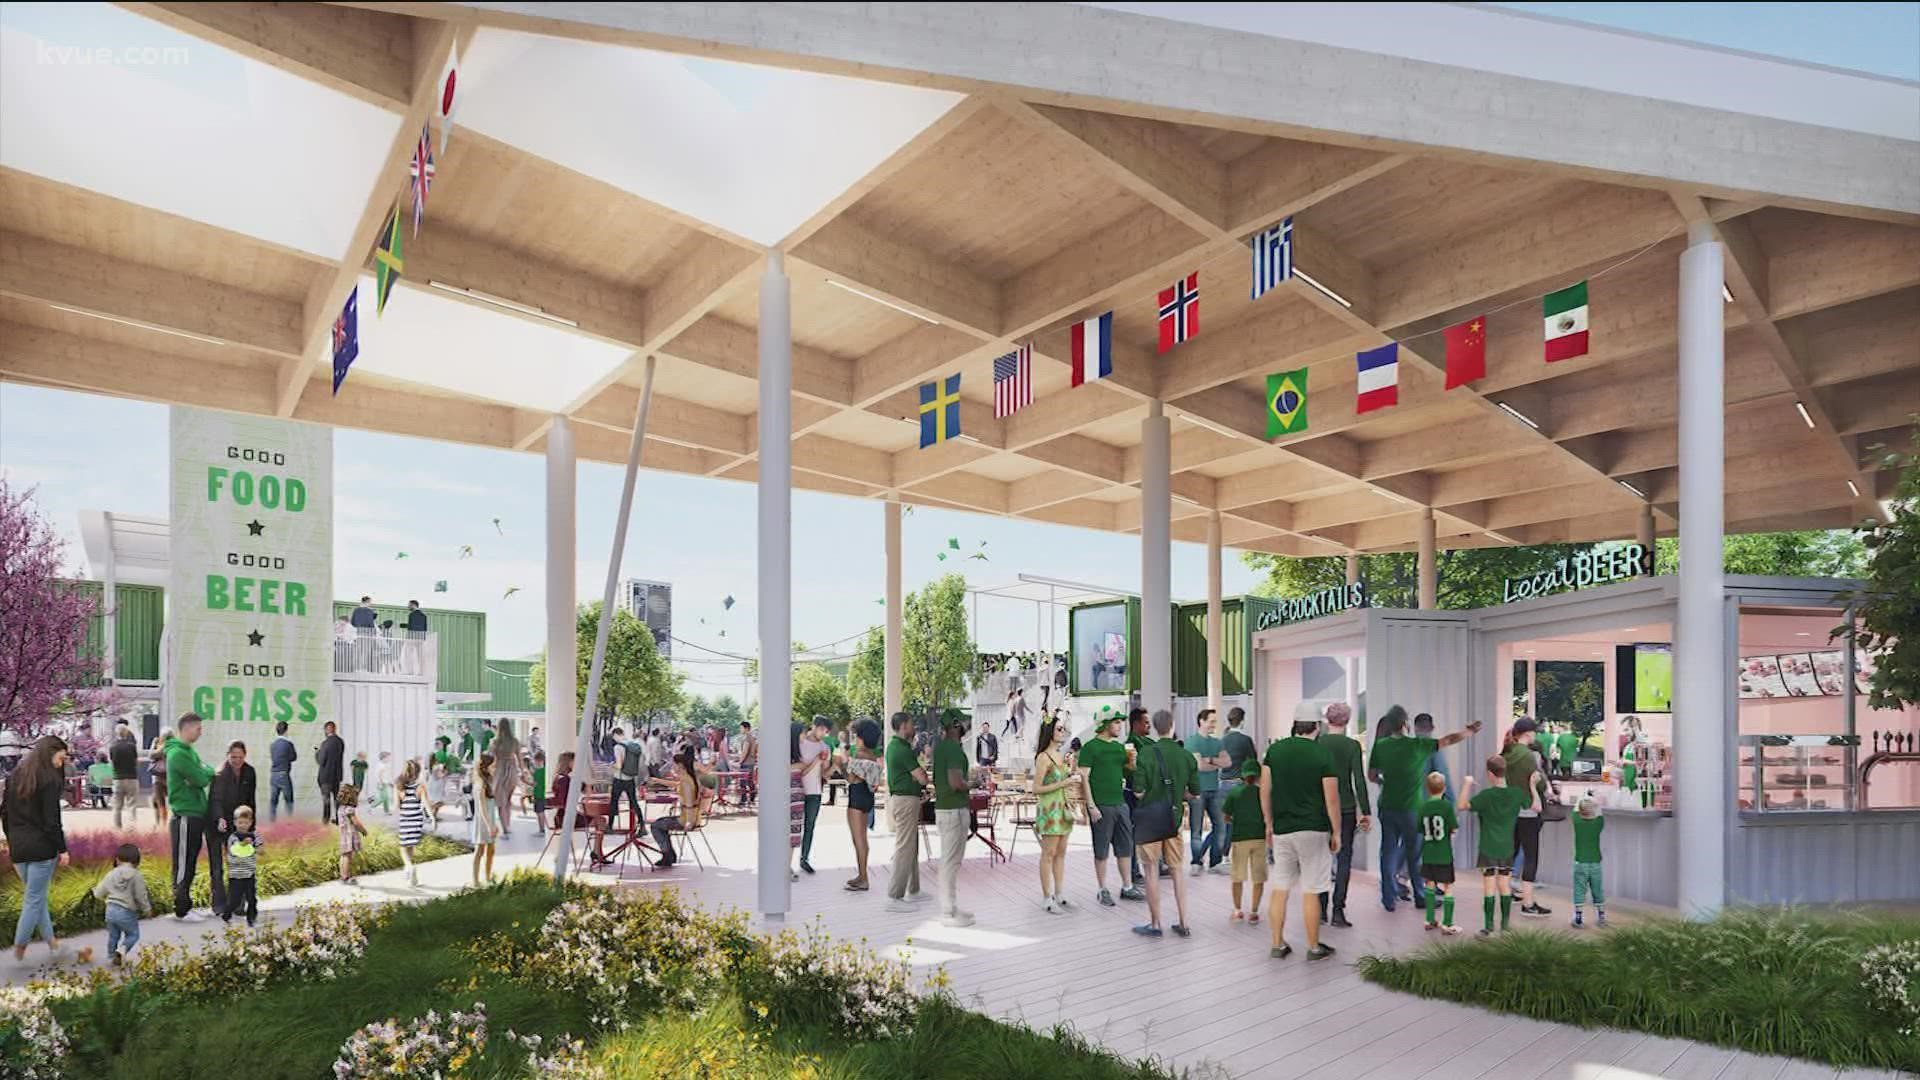 "The Pitch" is a sports, dining and entertainment destination at the Austin FC training facility.